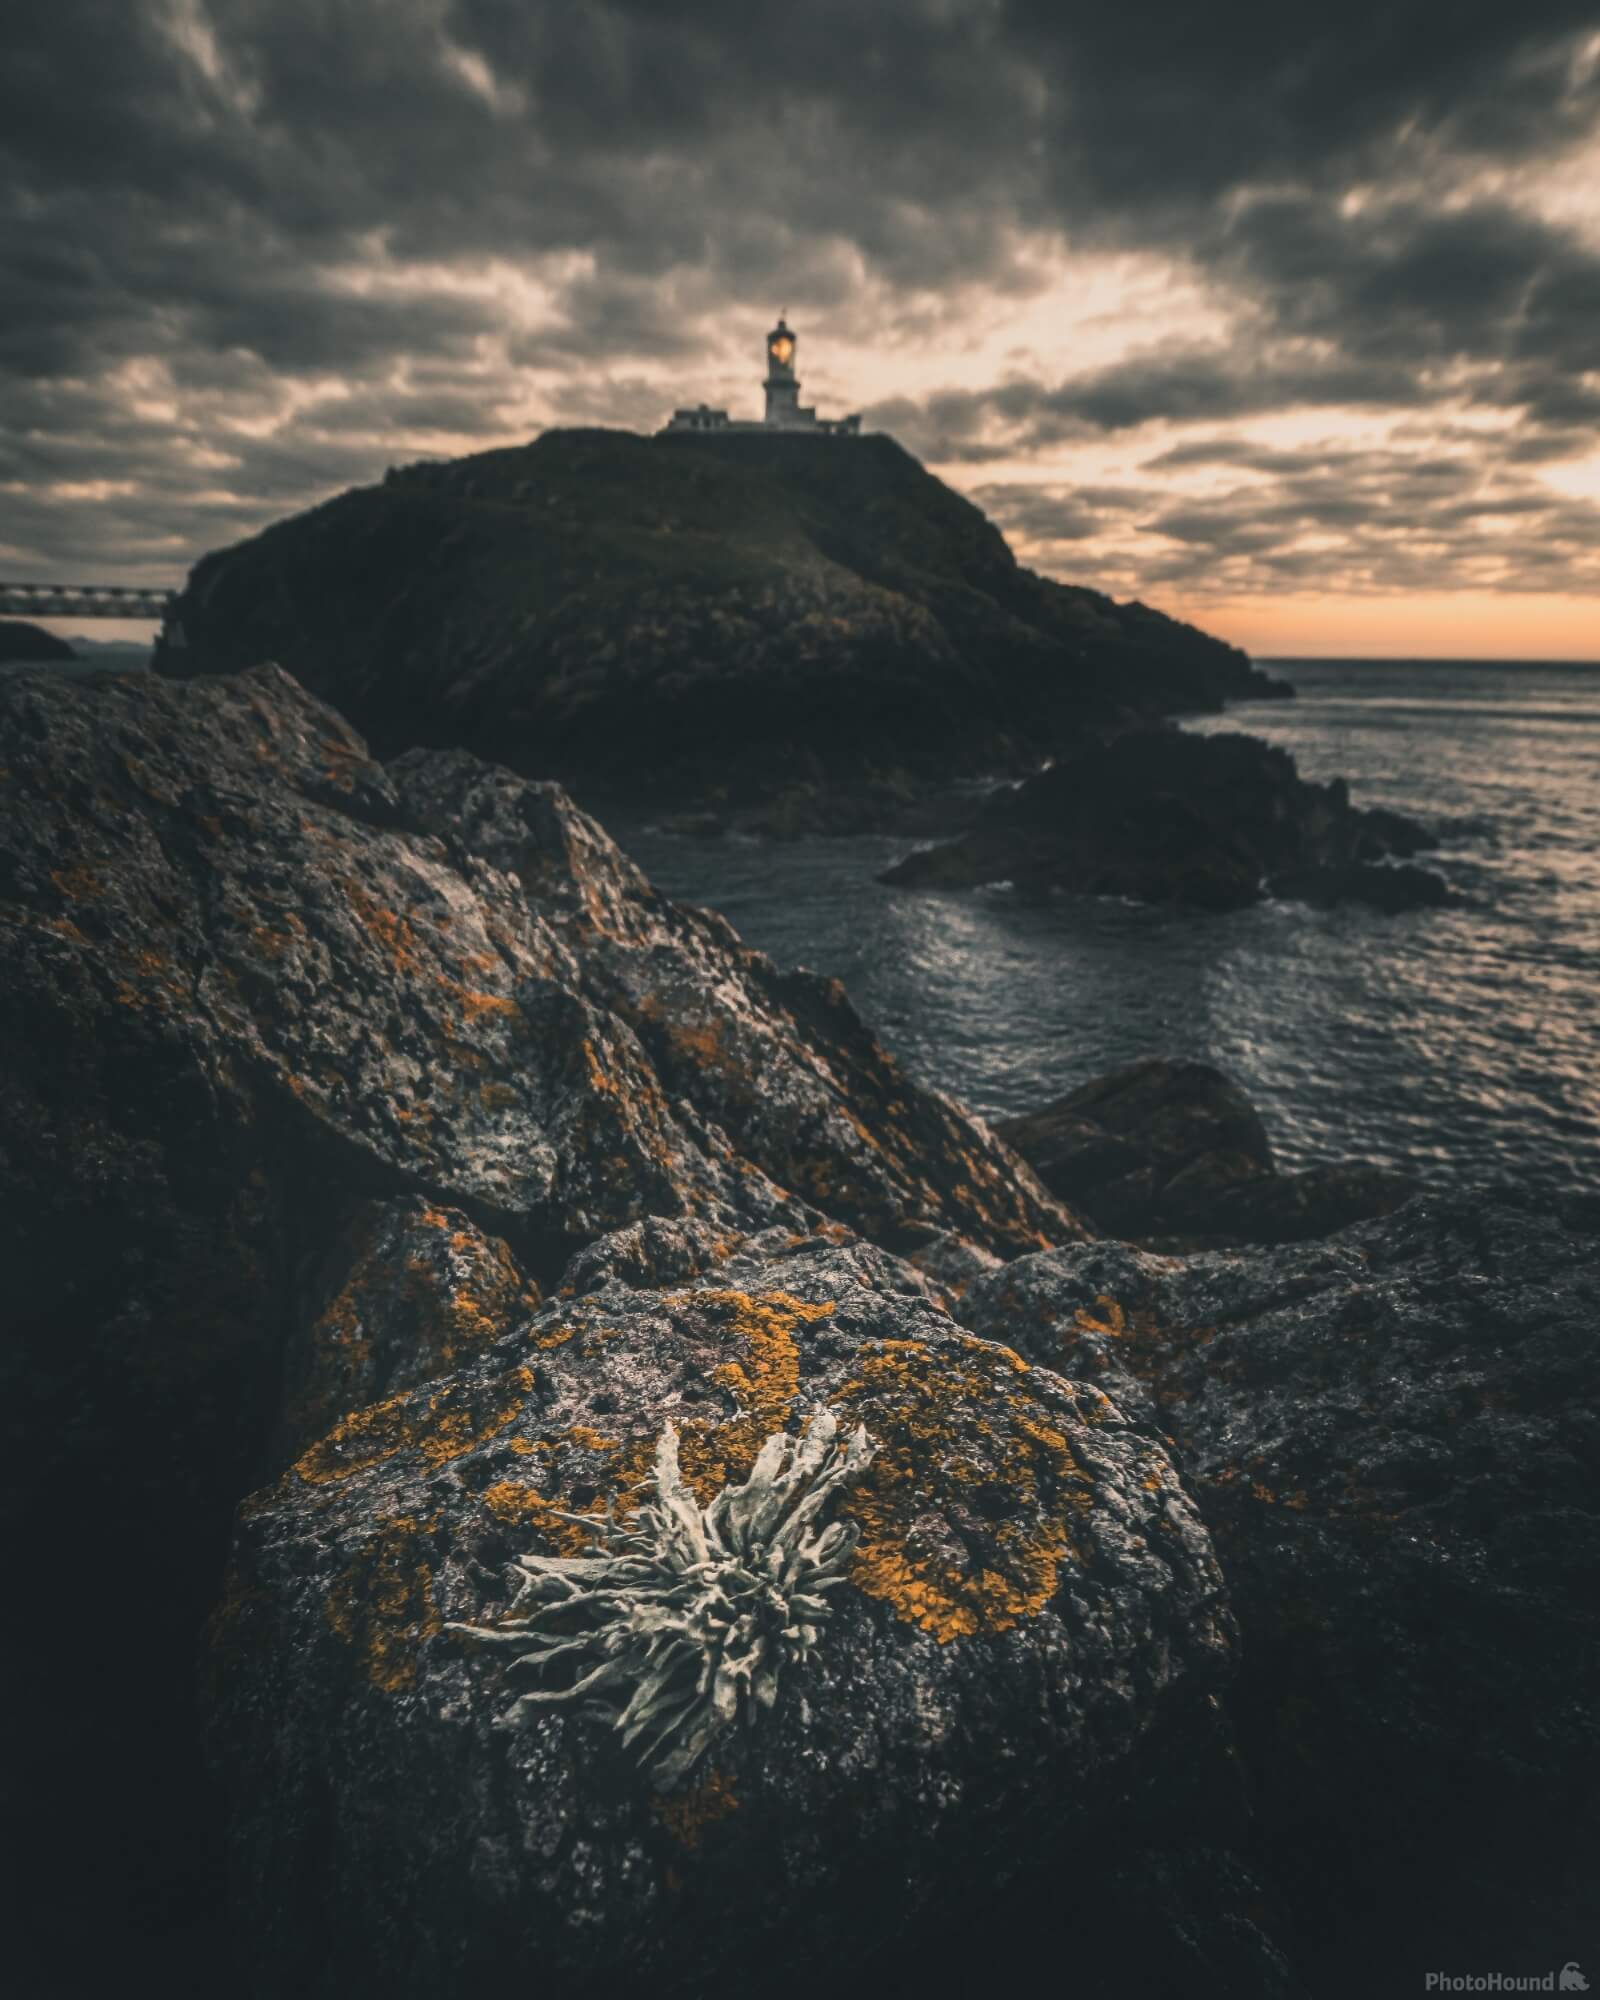 Image of Strumble Head Lighthouse by Daniel Phillips